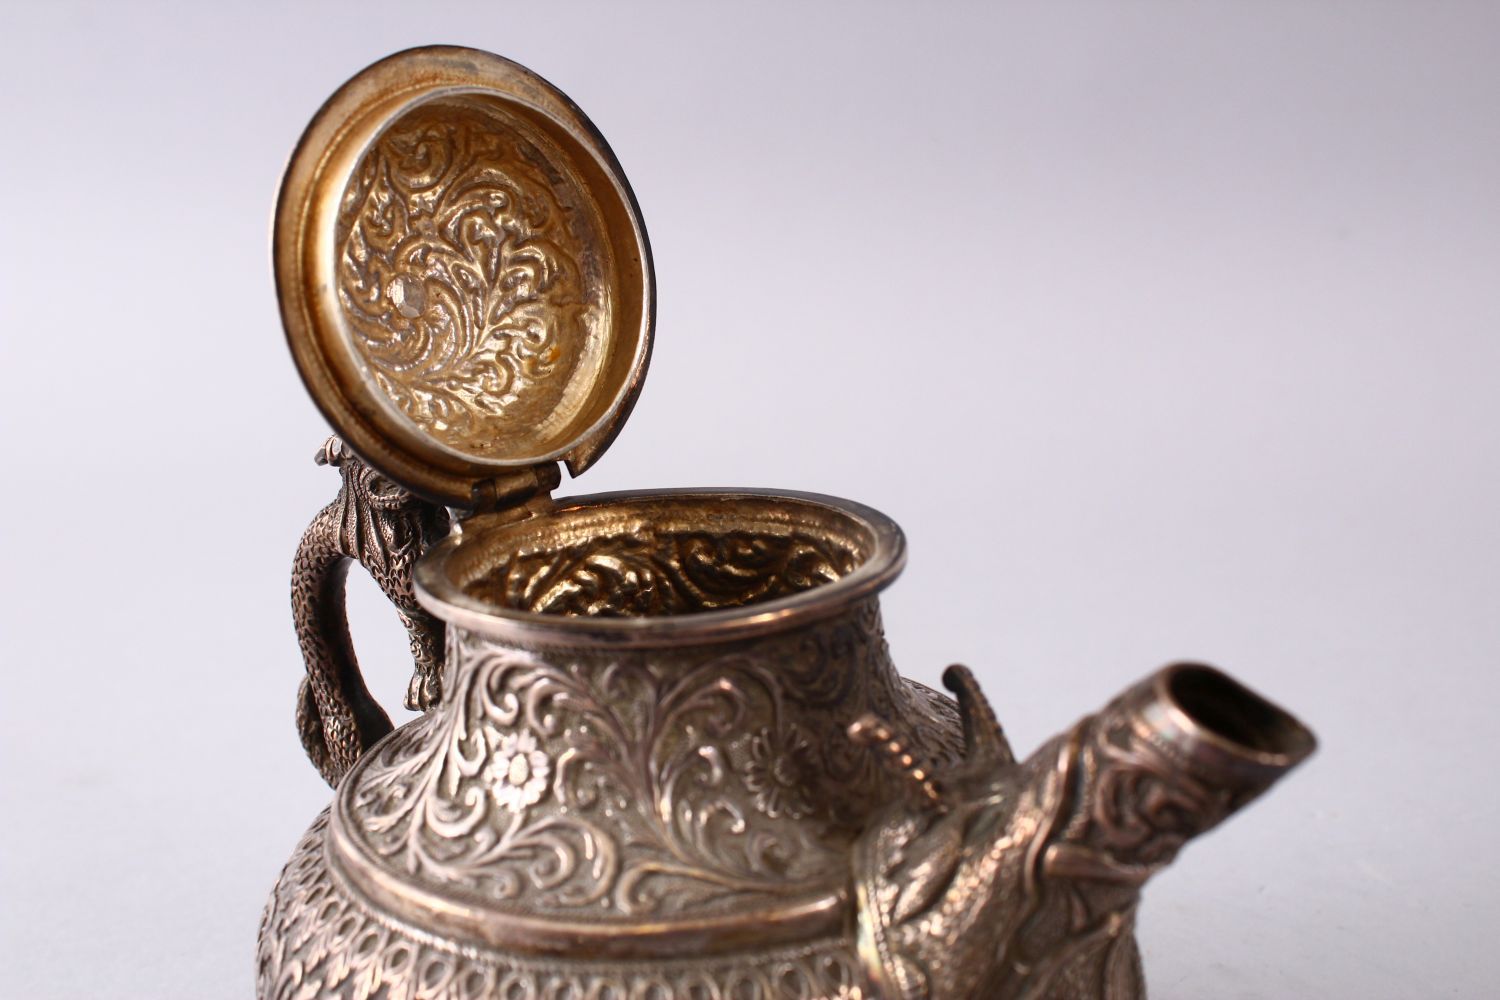 A GOOD 19TH CENTURY TURKISH SOLID SILVER TEAPOT carved with formal foliage and a dog style handle, - Image 7 of 10